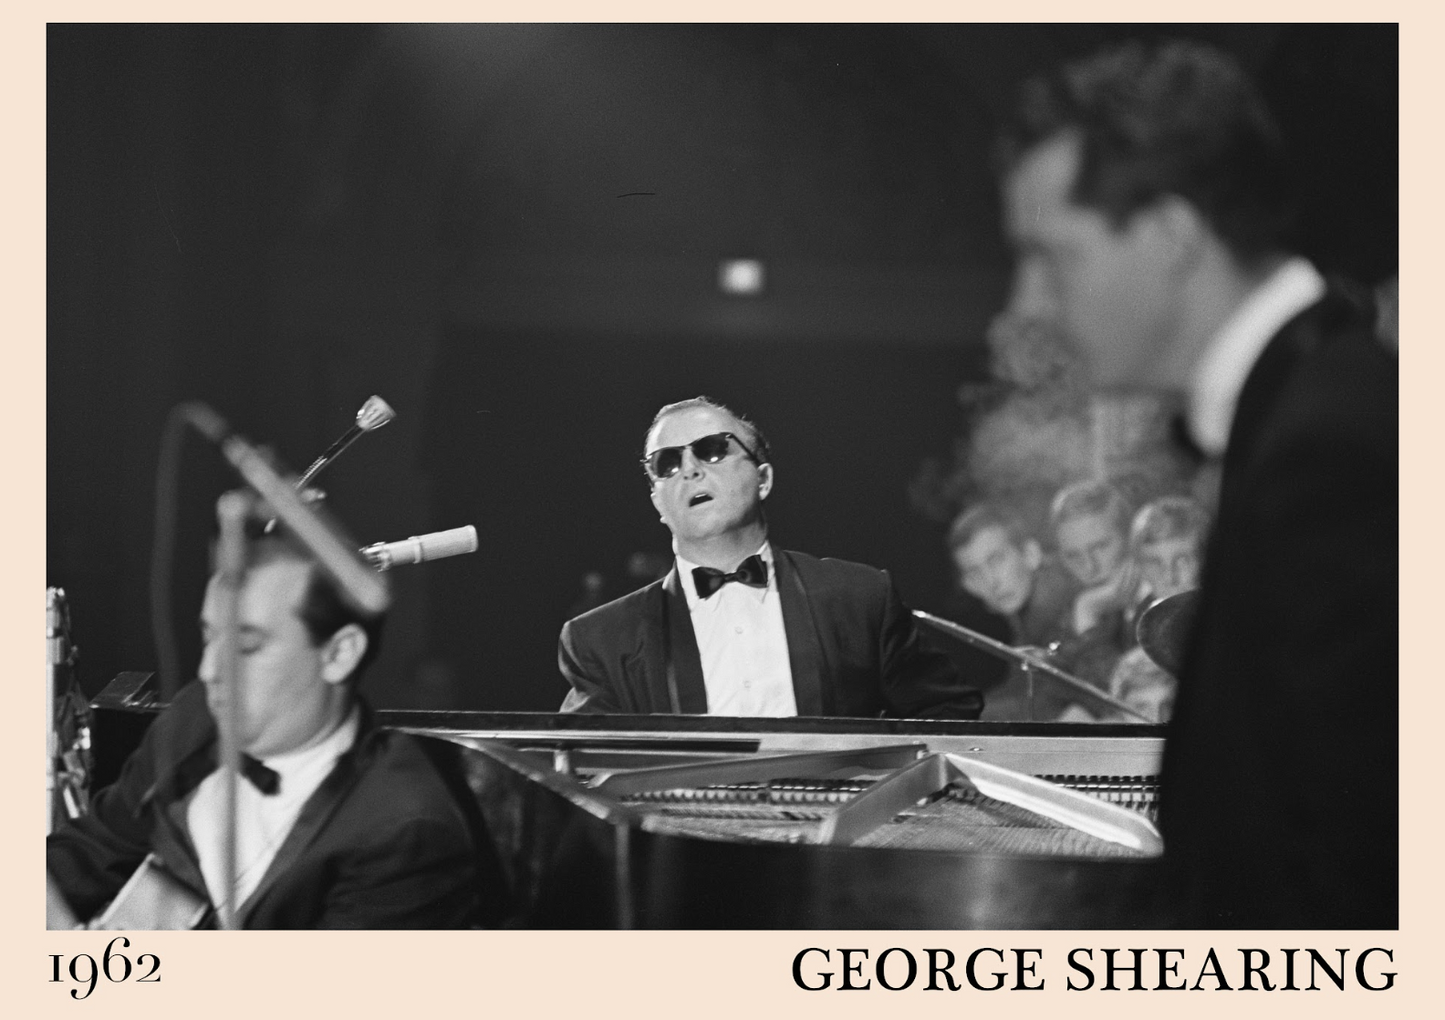 1962 picture of George Shearing, crafted into a jazz poster